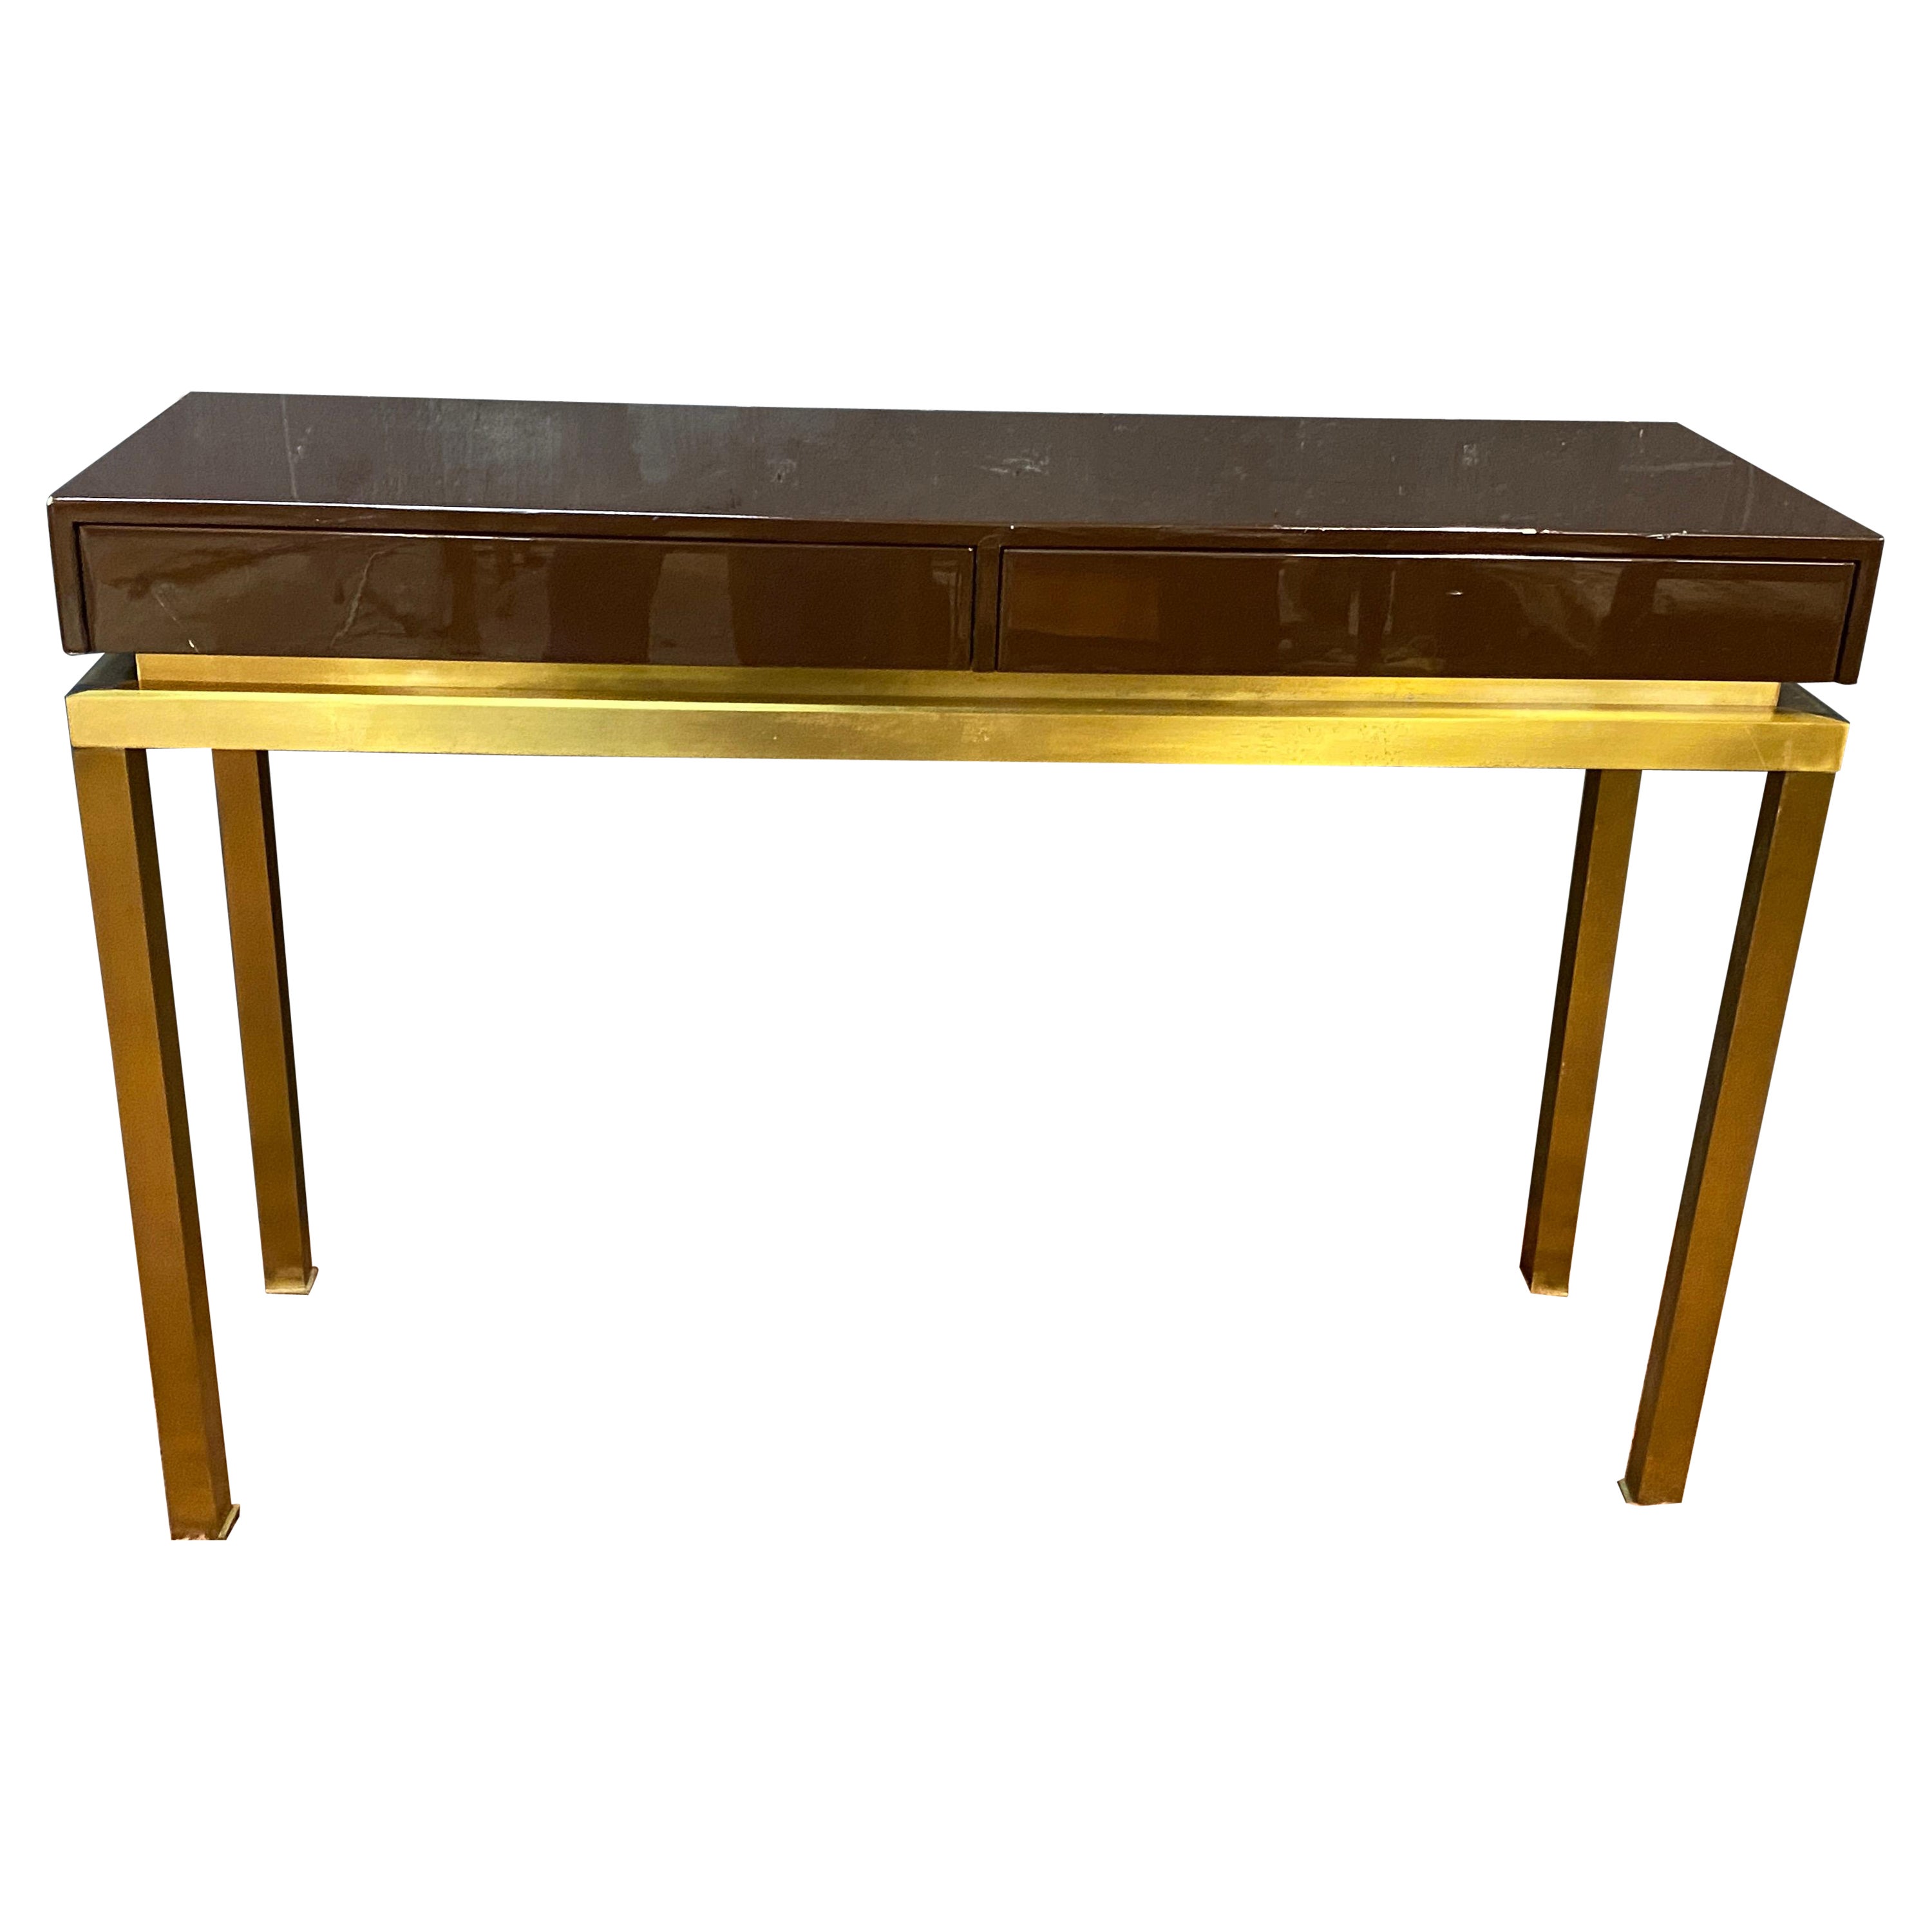 Guy Lefevre, elegant console in lacquered wood and brass, circa 1970